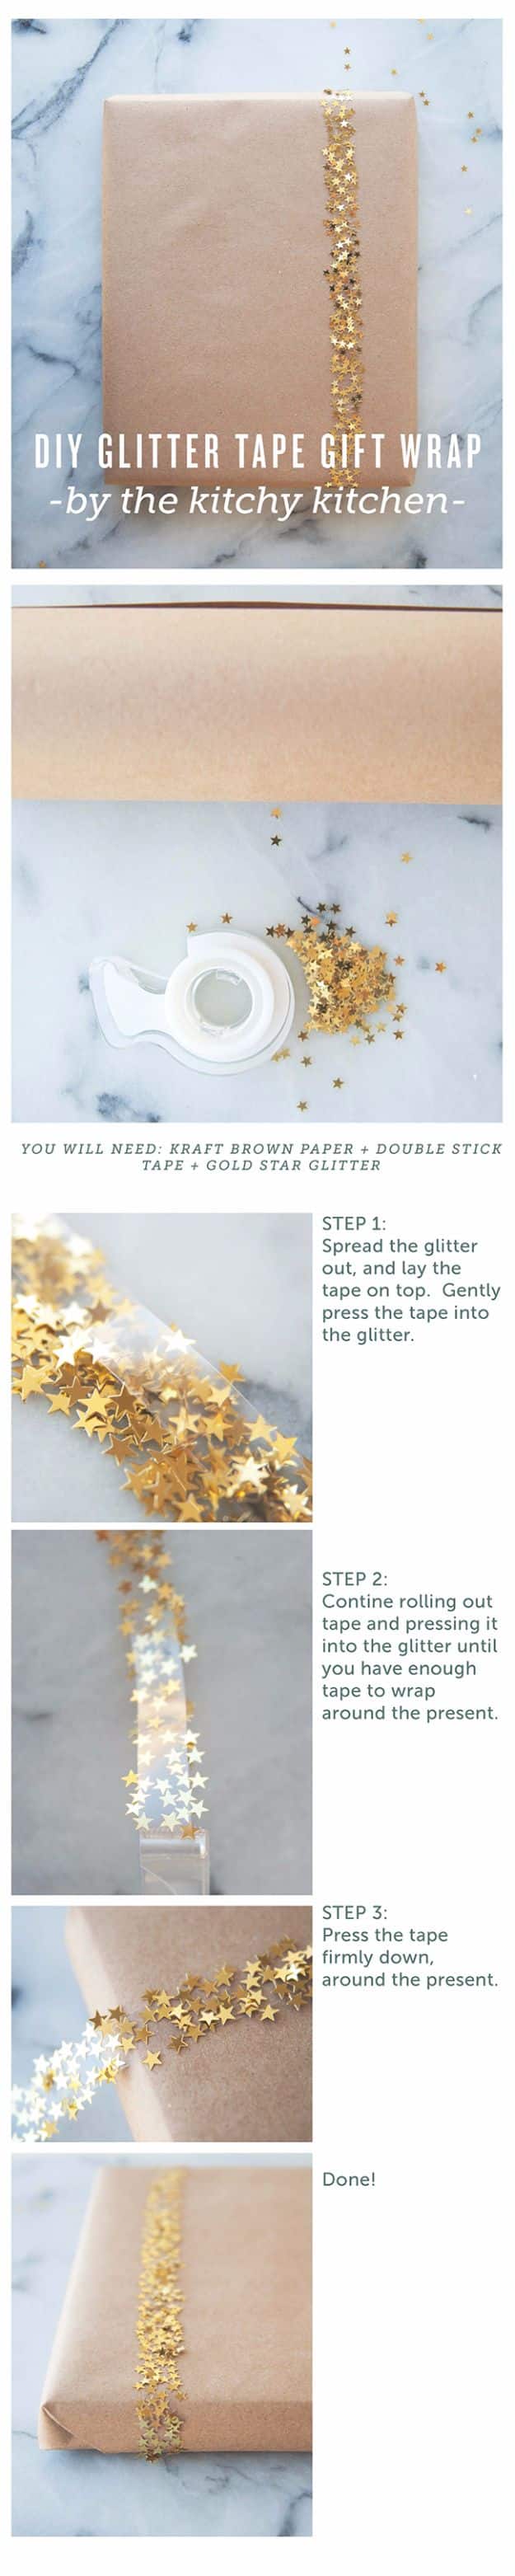 Cool Gift Wrapping Ideas - DIY Glitter Tape Gift Wrap - Creative Ways To Wrap Presents on A Budget - Best Christmas Gift Wrap Ideas - How To Make Gift Bags, Reuse Wrapping Paper, Make Bows and Tags - Cute and Easy Ideas for Wrapping Gifts for the Holidays - Step by Step Instructions and Photo Tutorials 